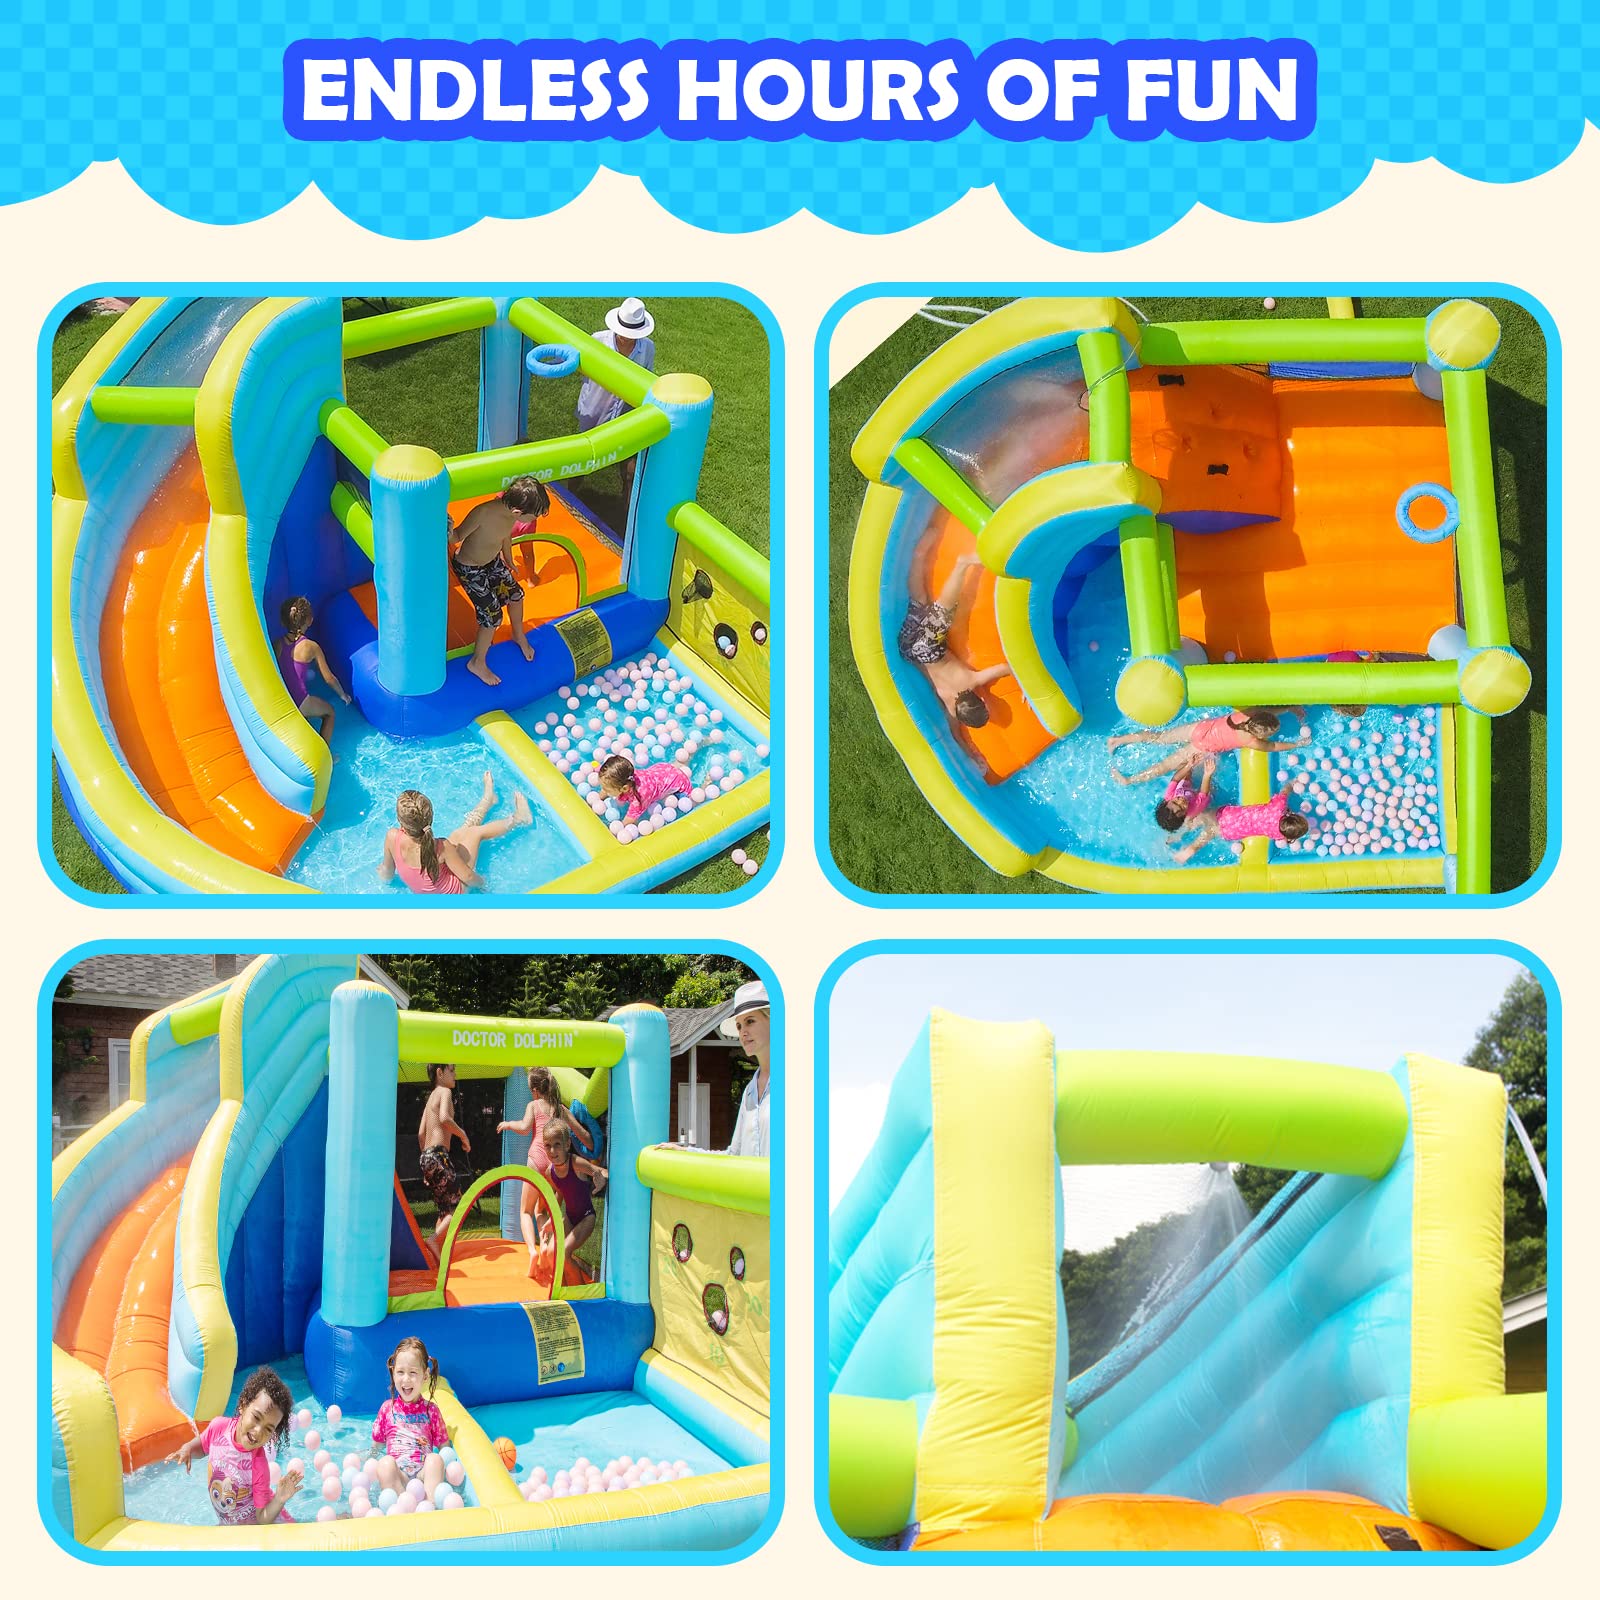 Doctor Dolphin Inflatable Water Slides for Kids Backyard, Bounce House with Waterslide, Blow Up Kids Water Slide, Inflatable Water Park Outdoor for Wet and Dry.